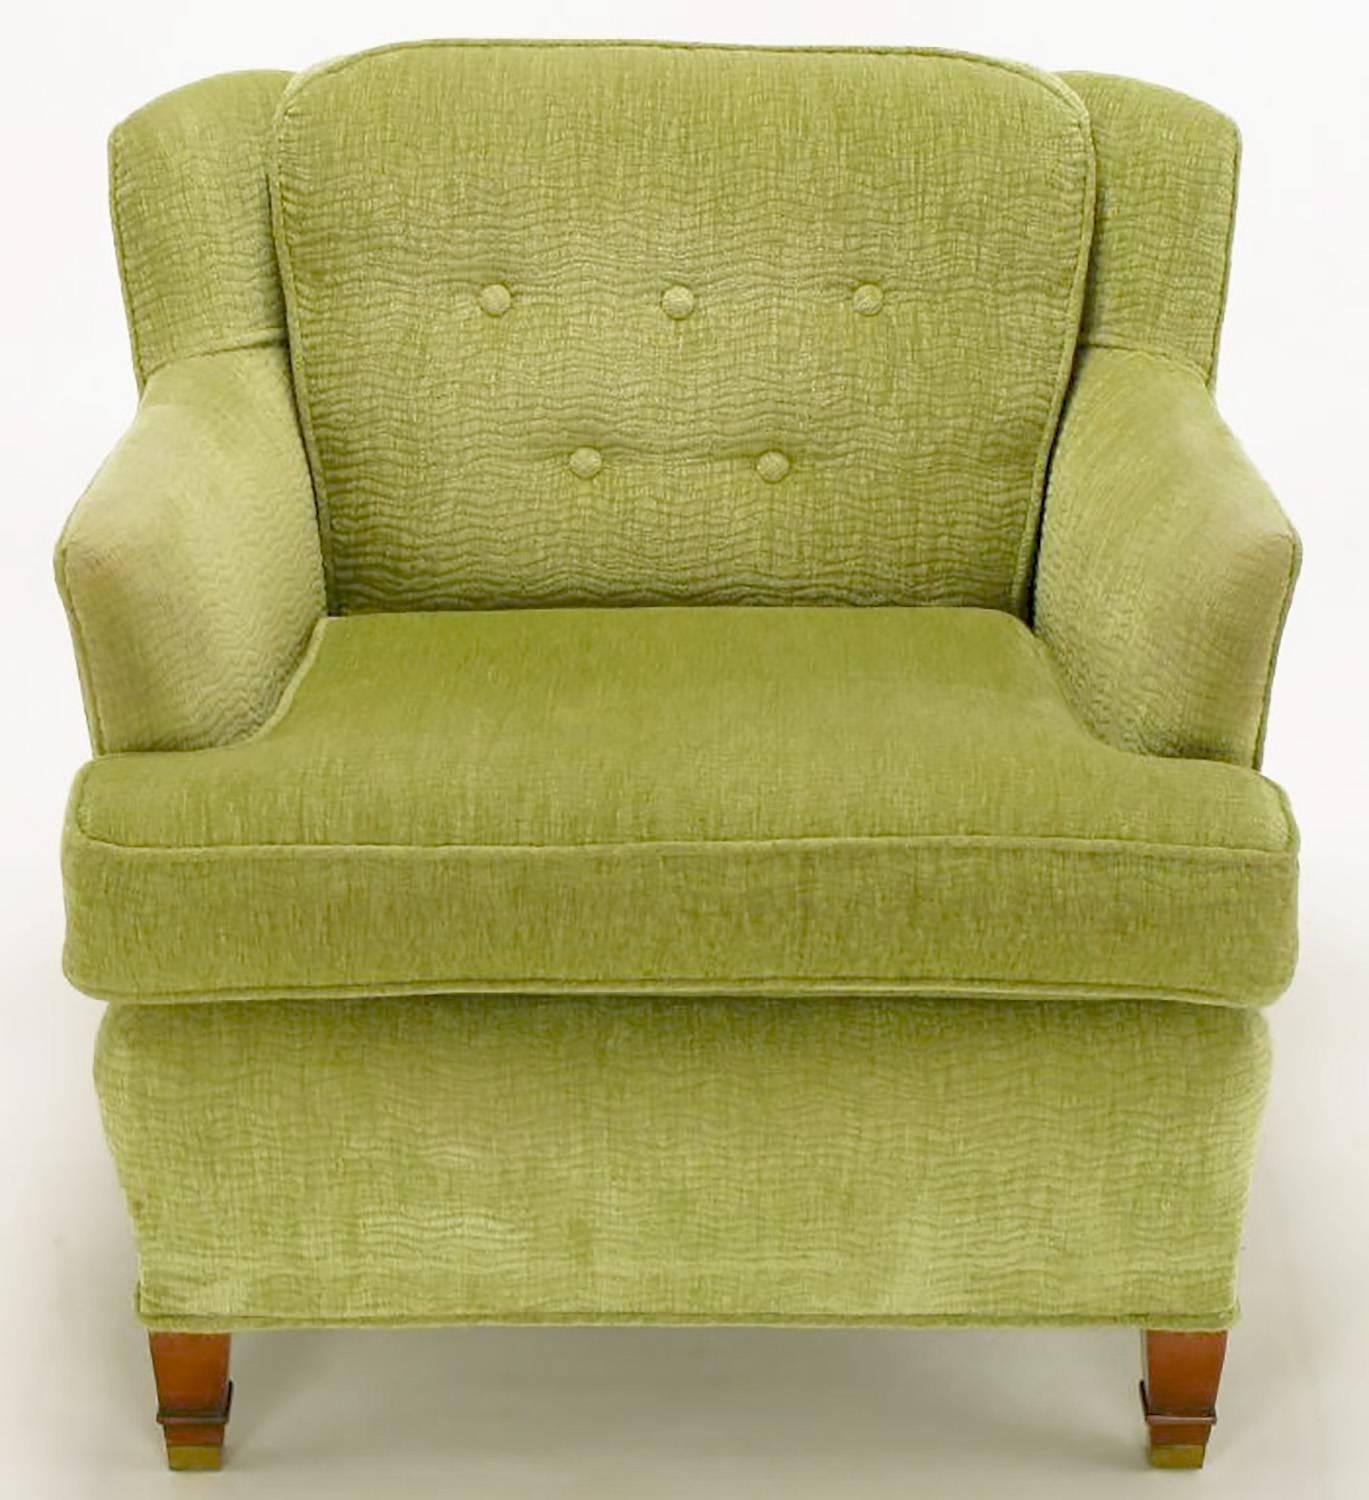 low wingback chair